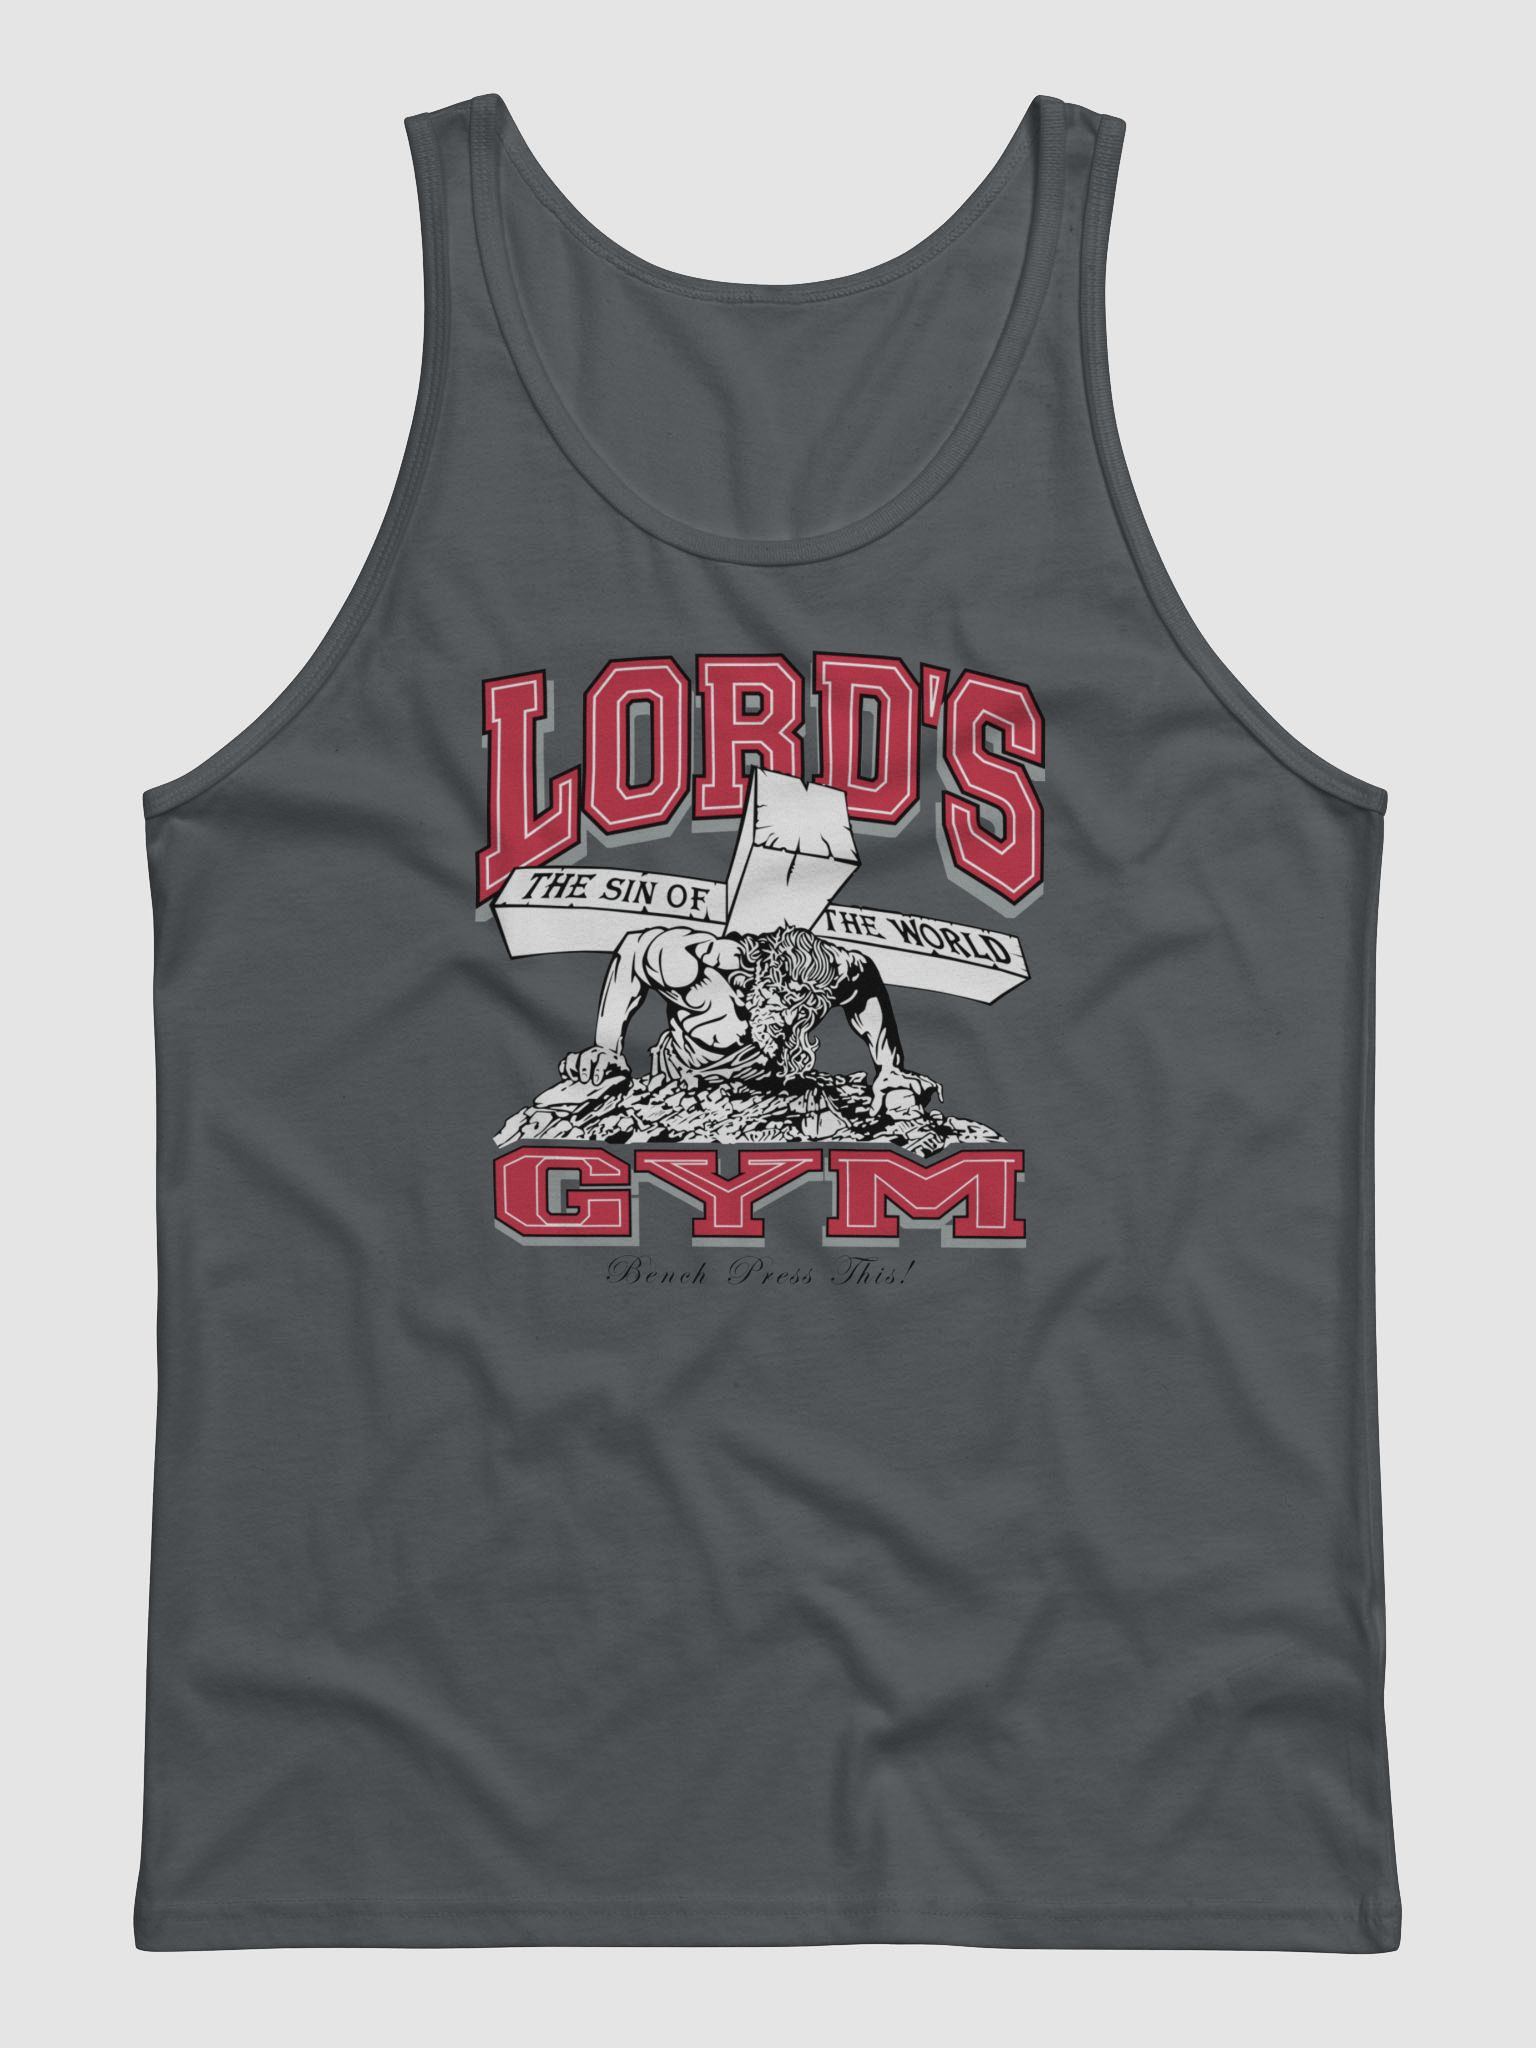 Lord's Gym Tank - Hope Outfitters